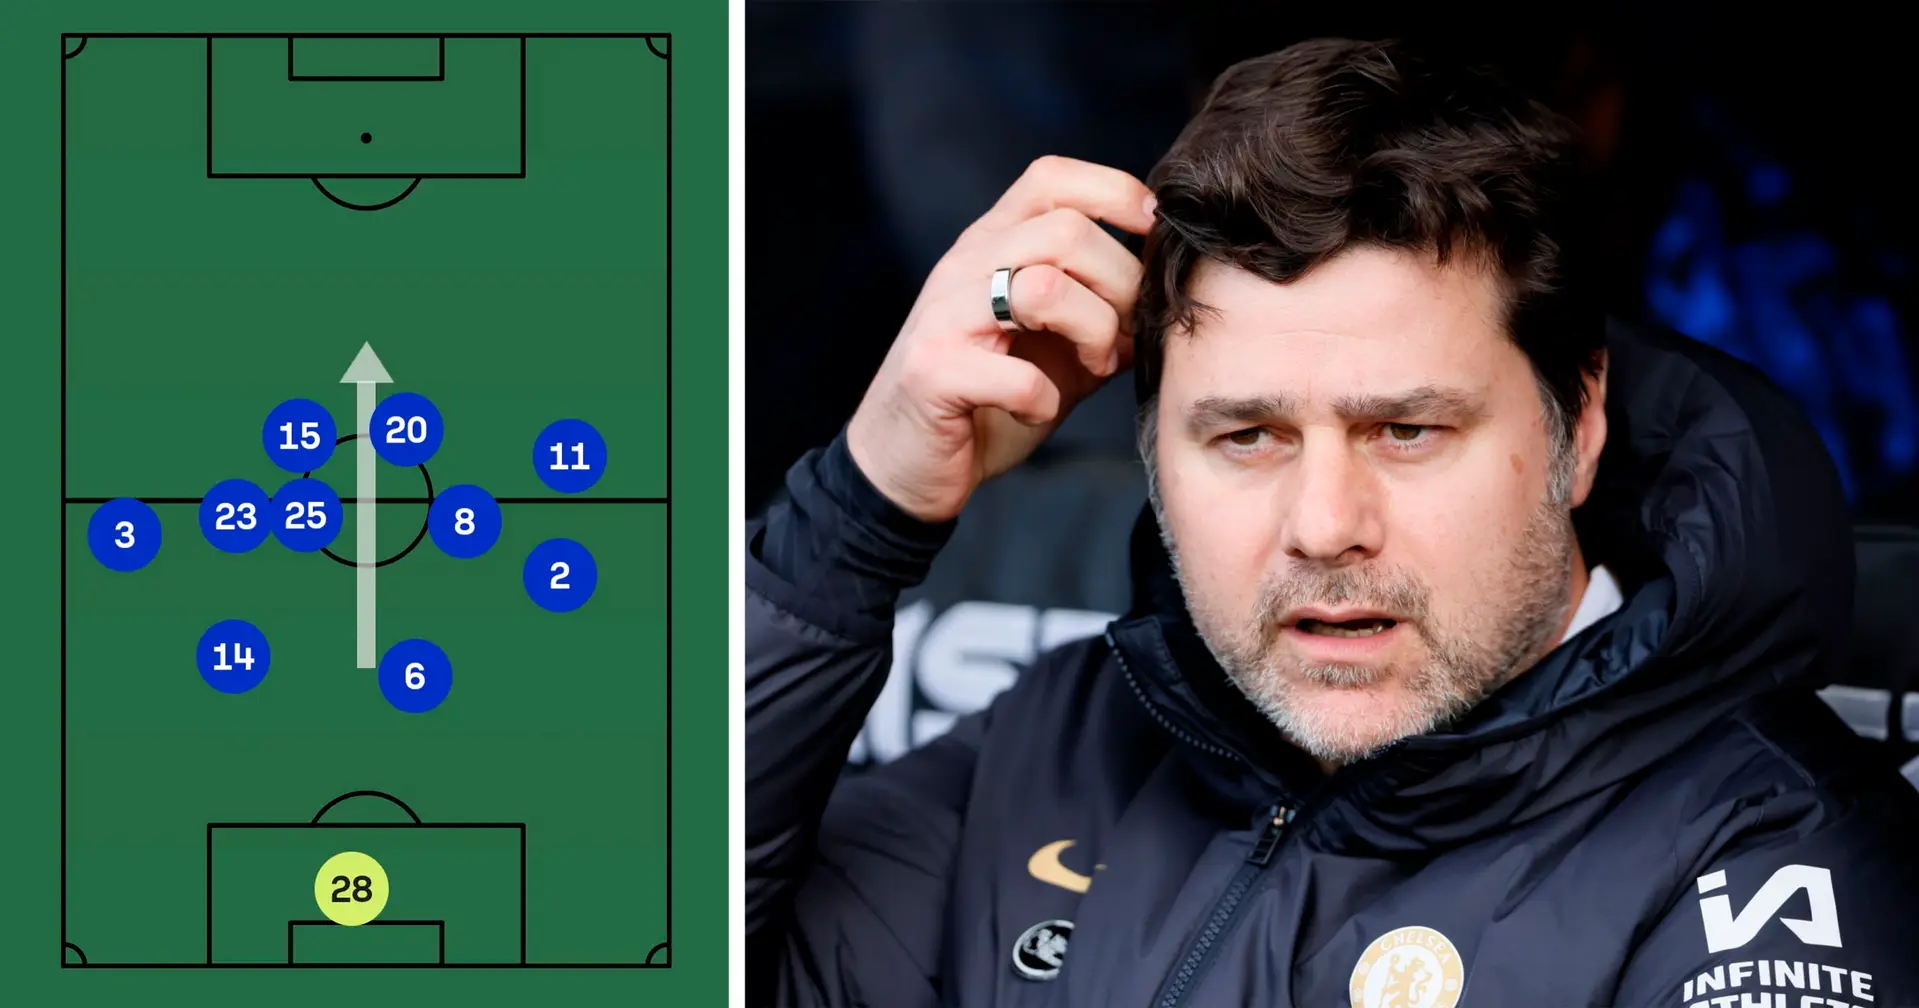 'Guess which side is the relegation bound team': Chelsea fan is shocked with the average player positions in the first half vs Sheffield United